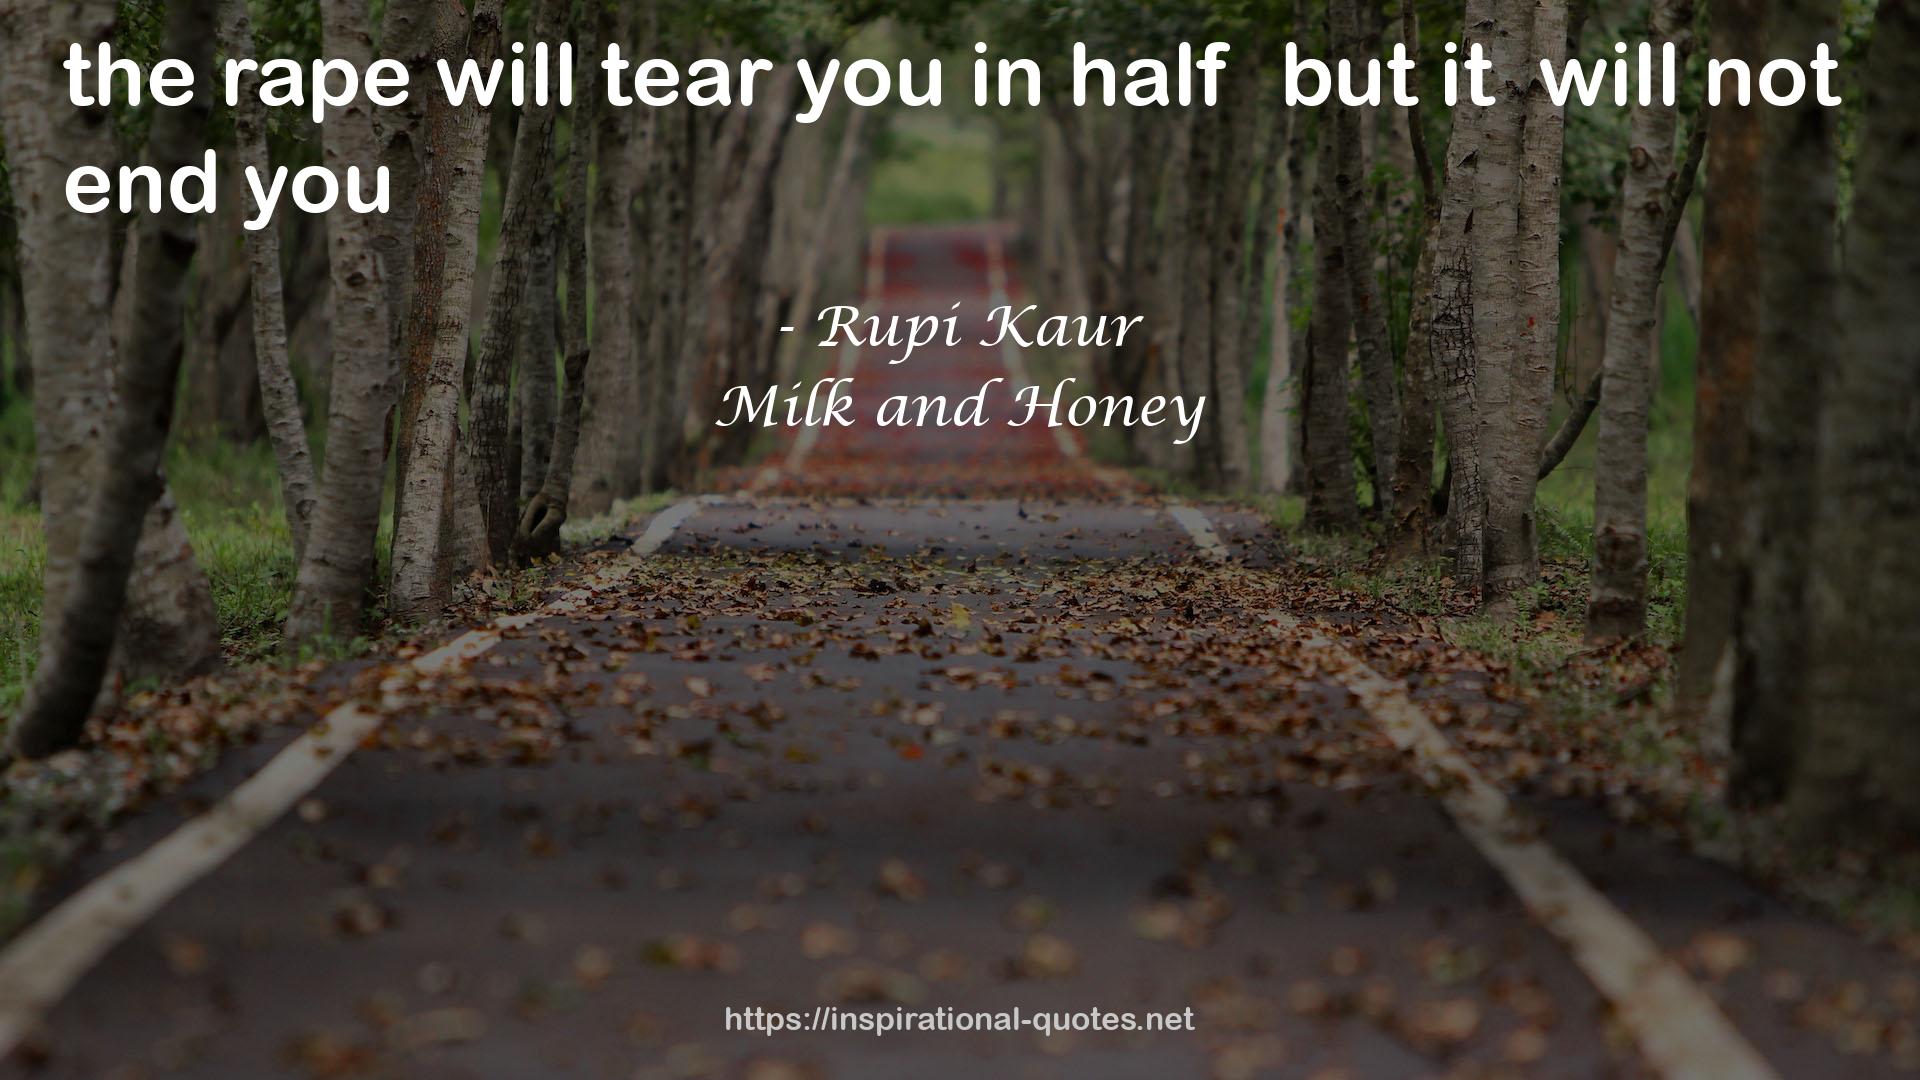 willtear  QUOTES